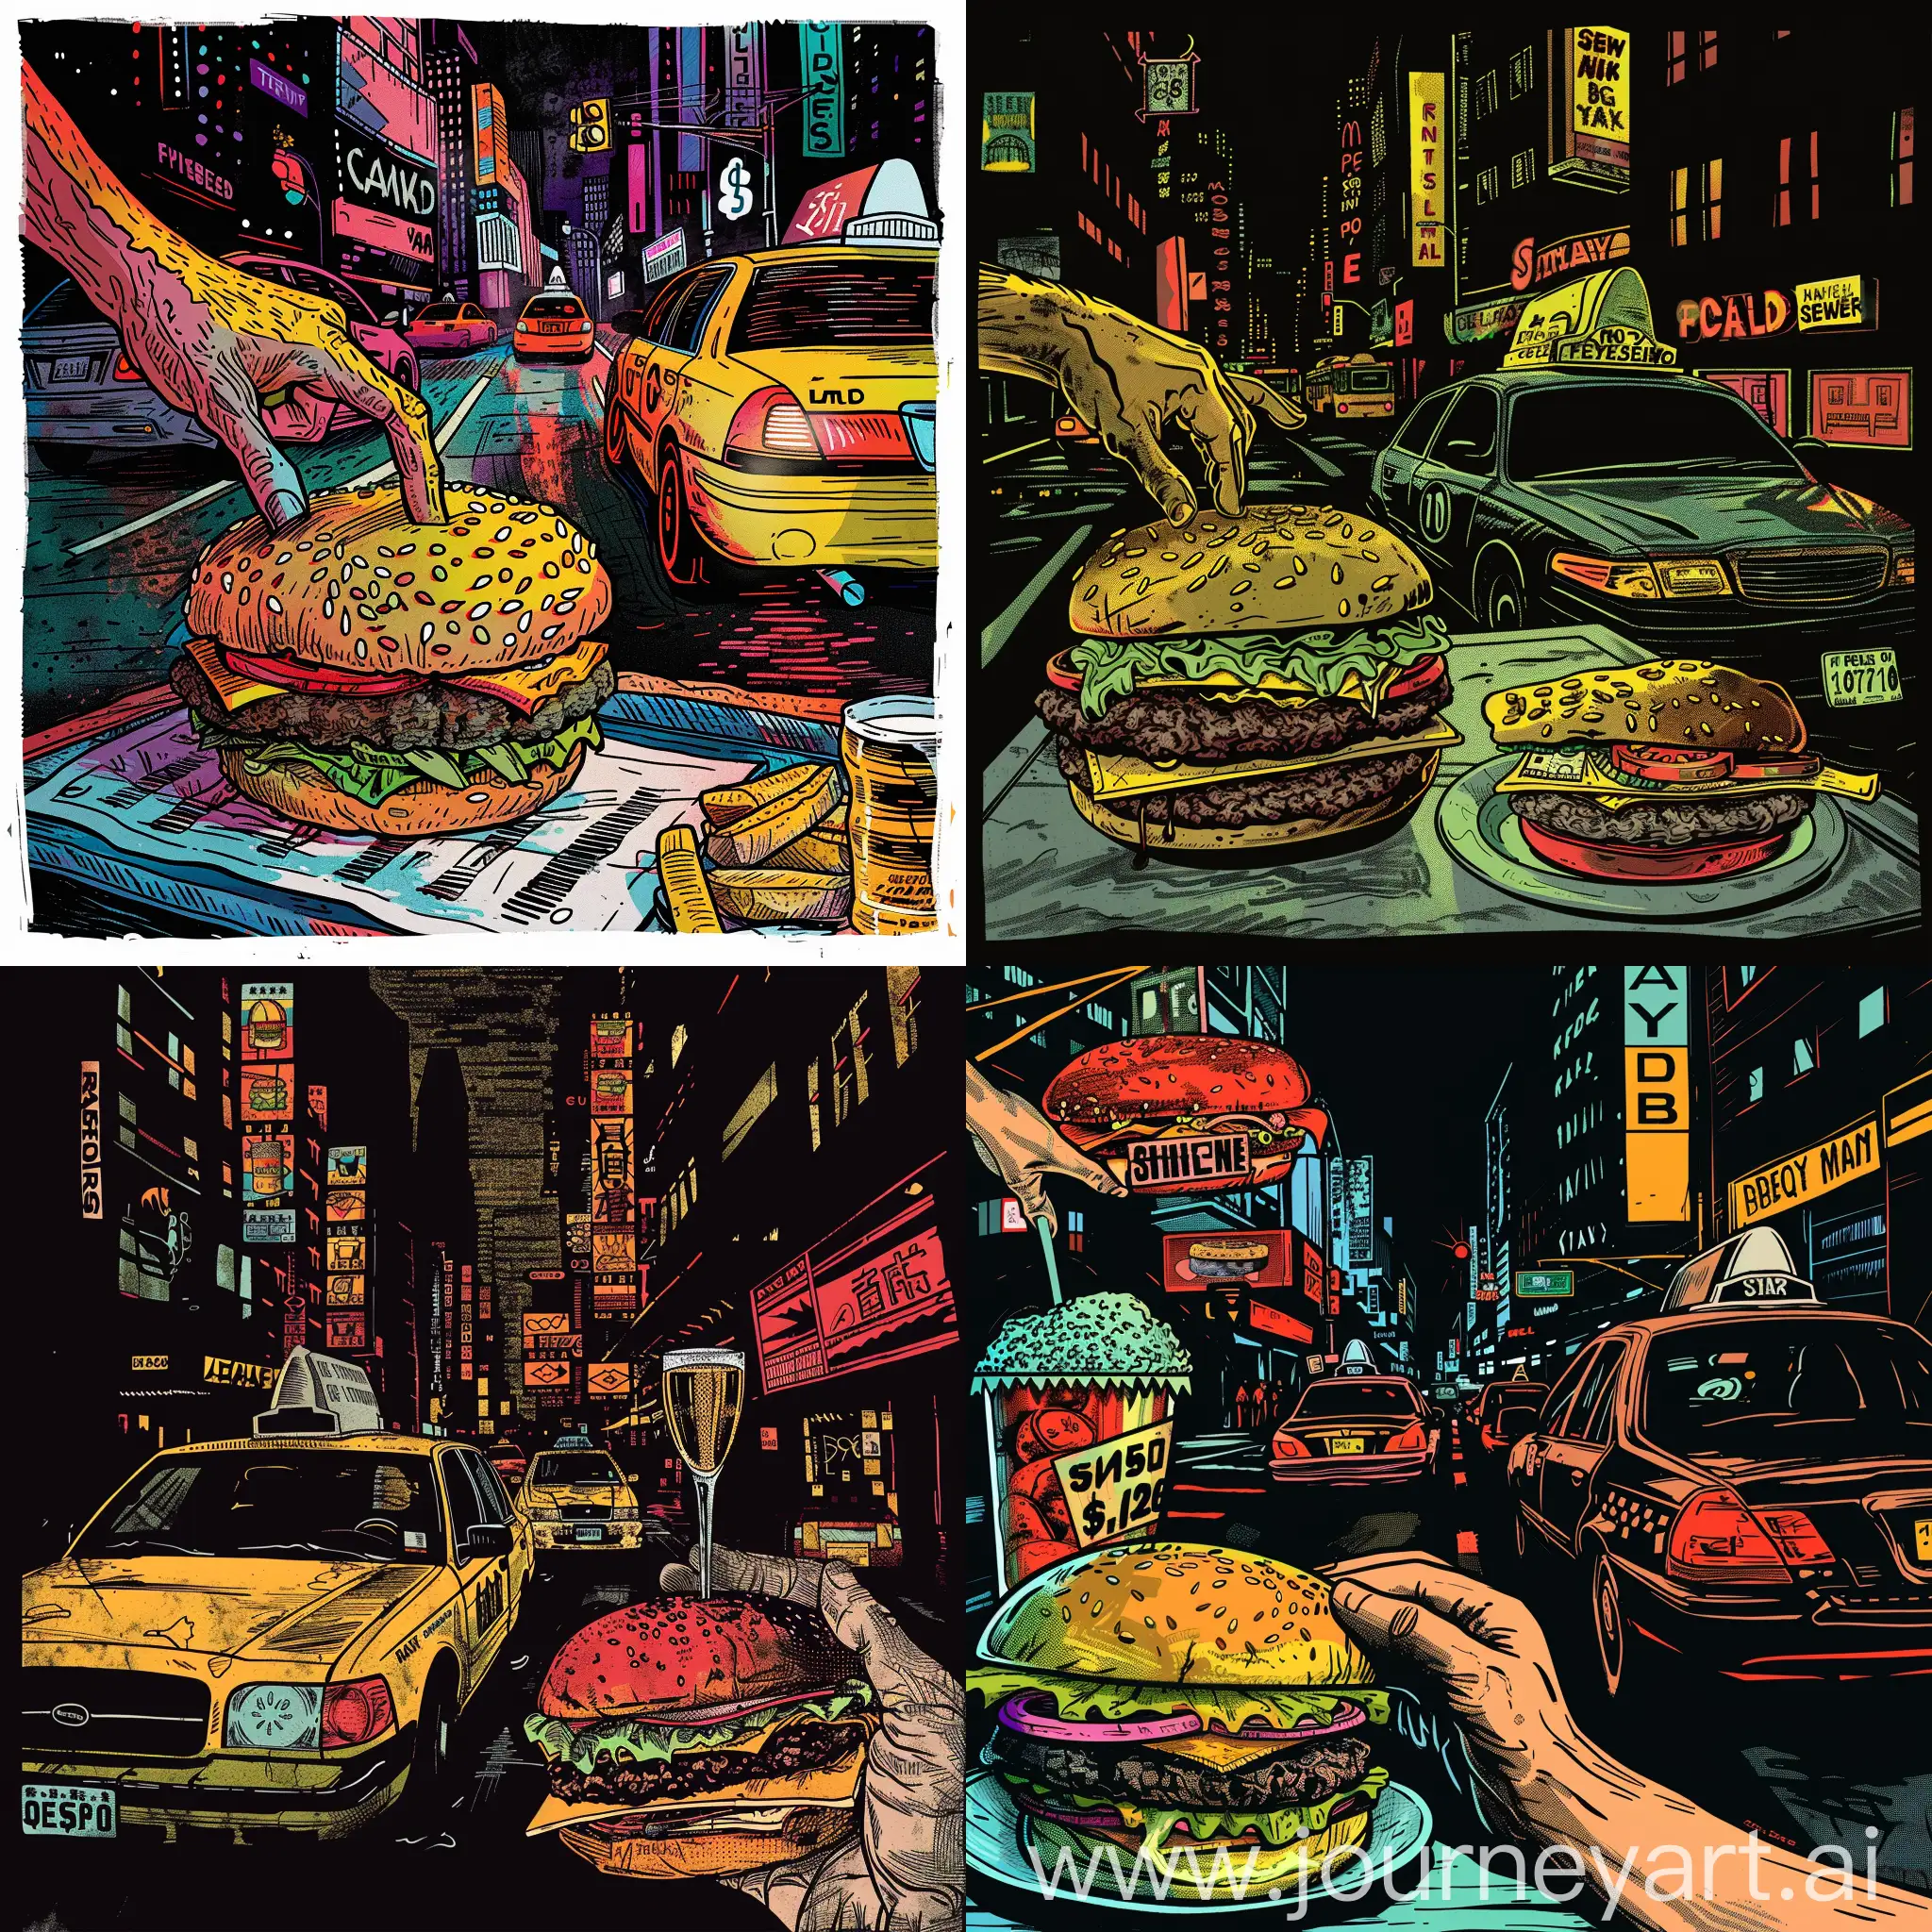 Urban-Street-Scene-with-Taxi-Burger-and-Beer-Sketch-in-Comics-Style